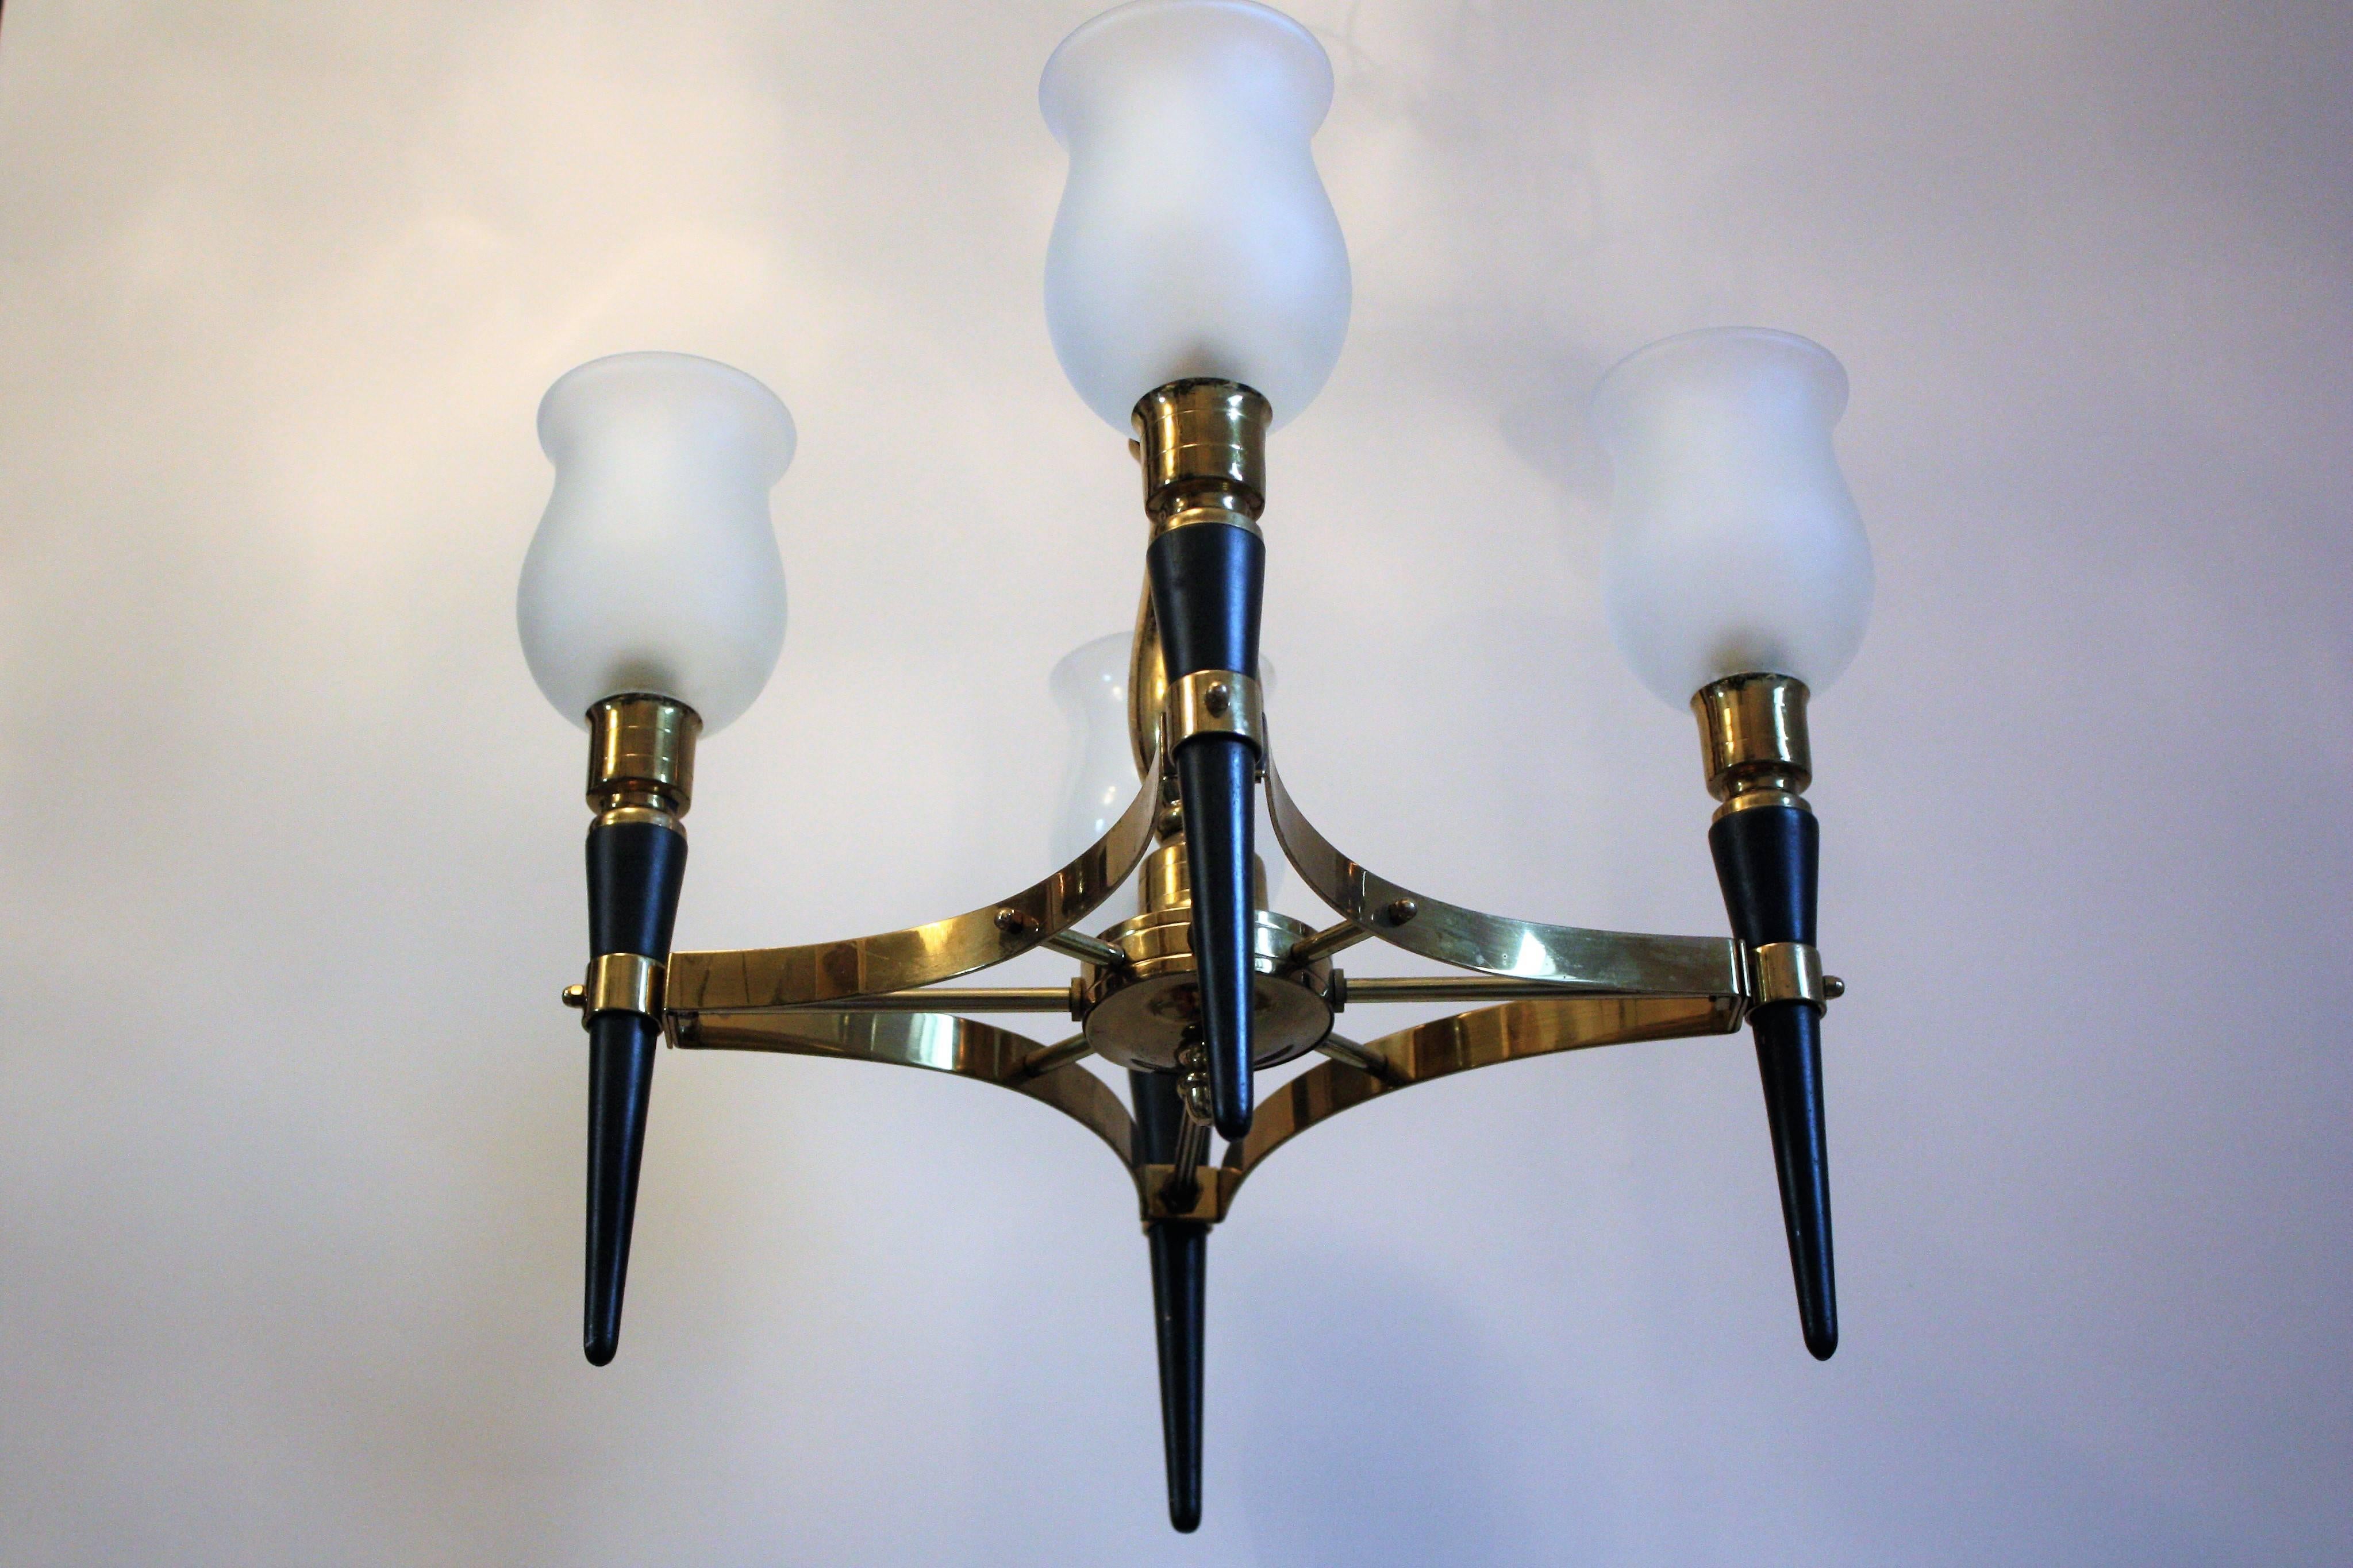 Beautiful, elegant four-light brass and glass chandelier by Maison Jansen, France, circa 1950s.
Socket: Four x B22. Rewired for US.
Very good condition with fine patina.